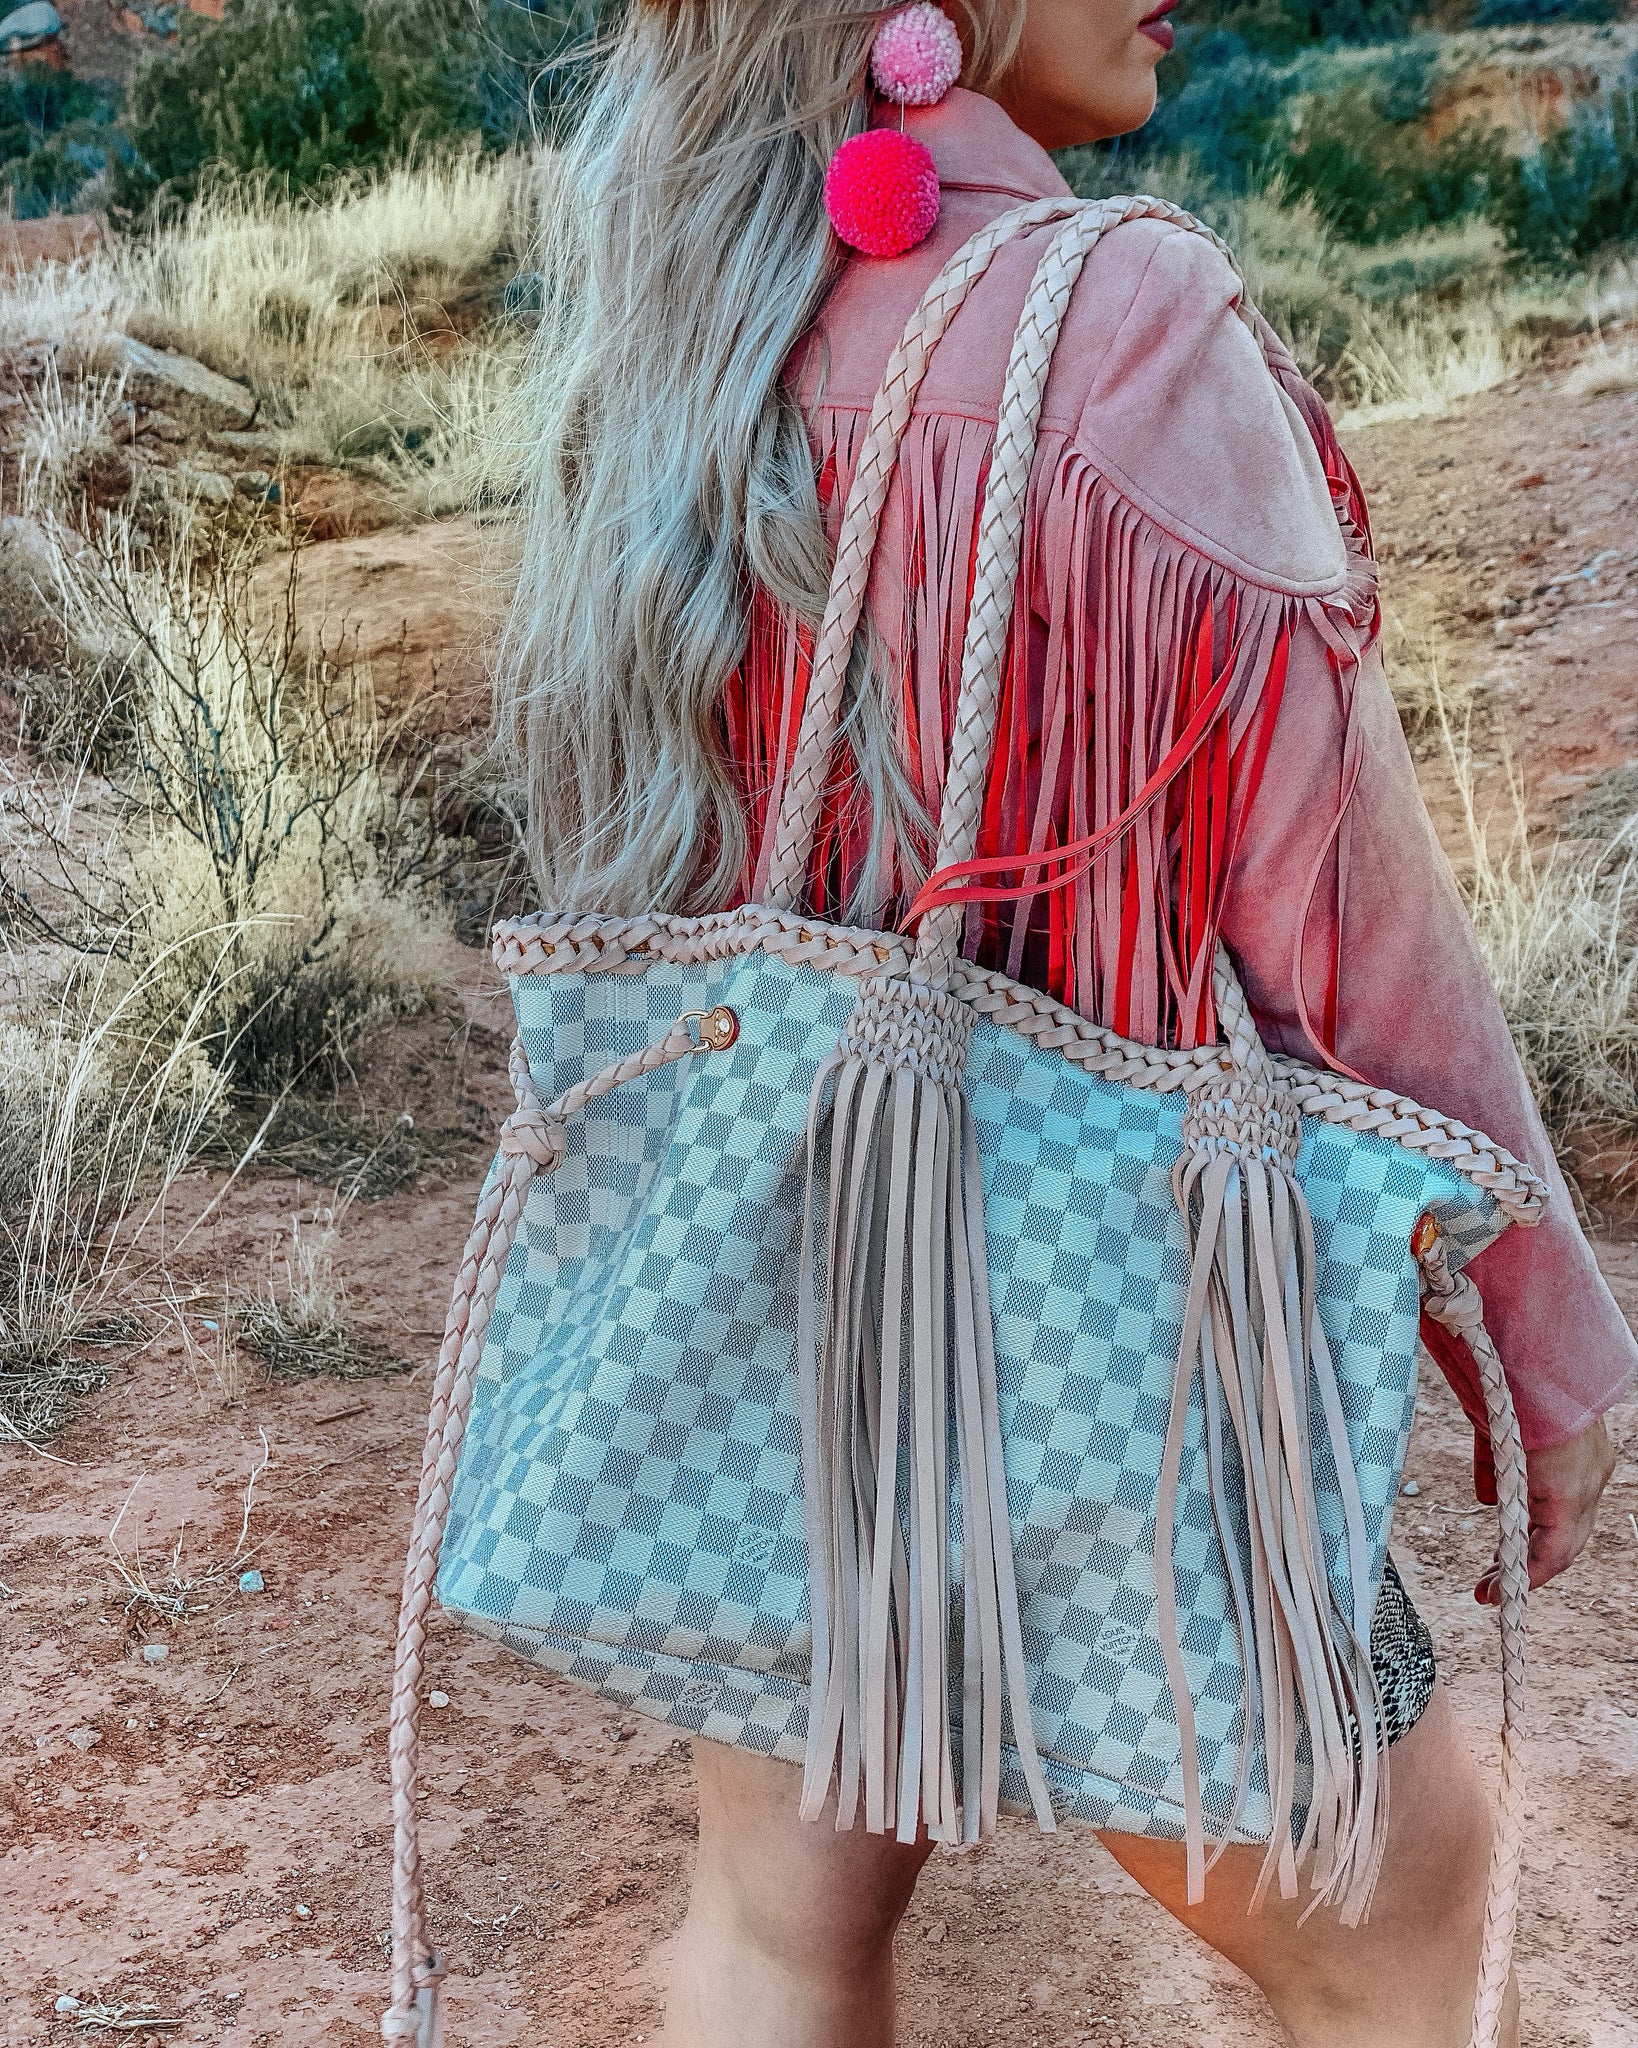 Neverfull – The Southern Gypsy Bags